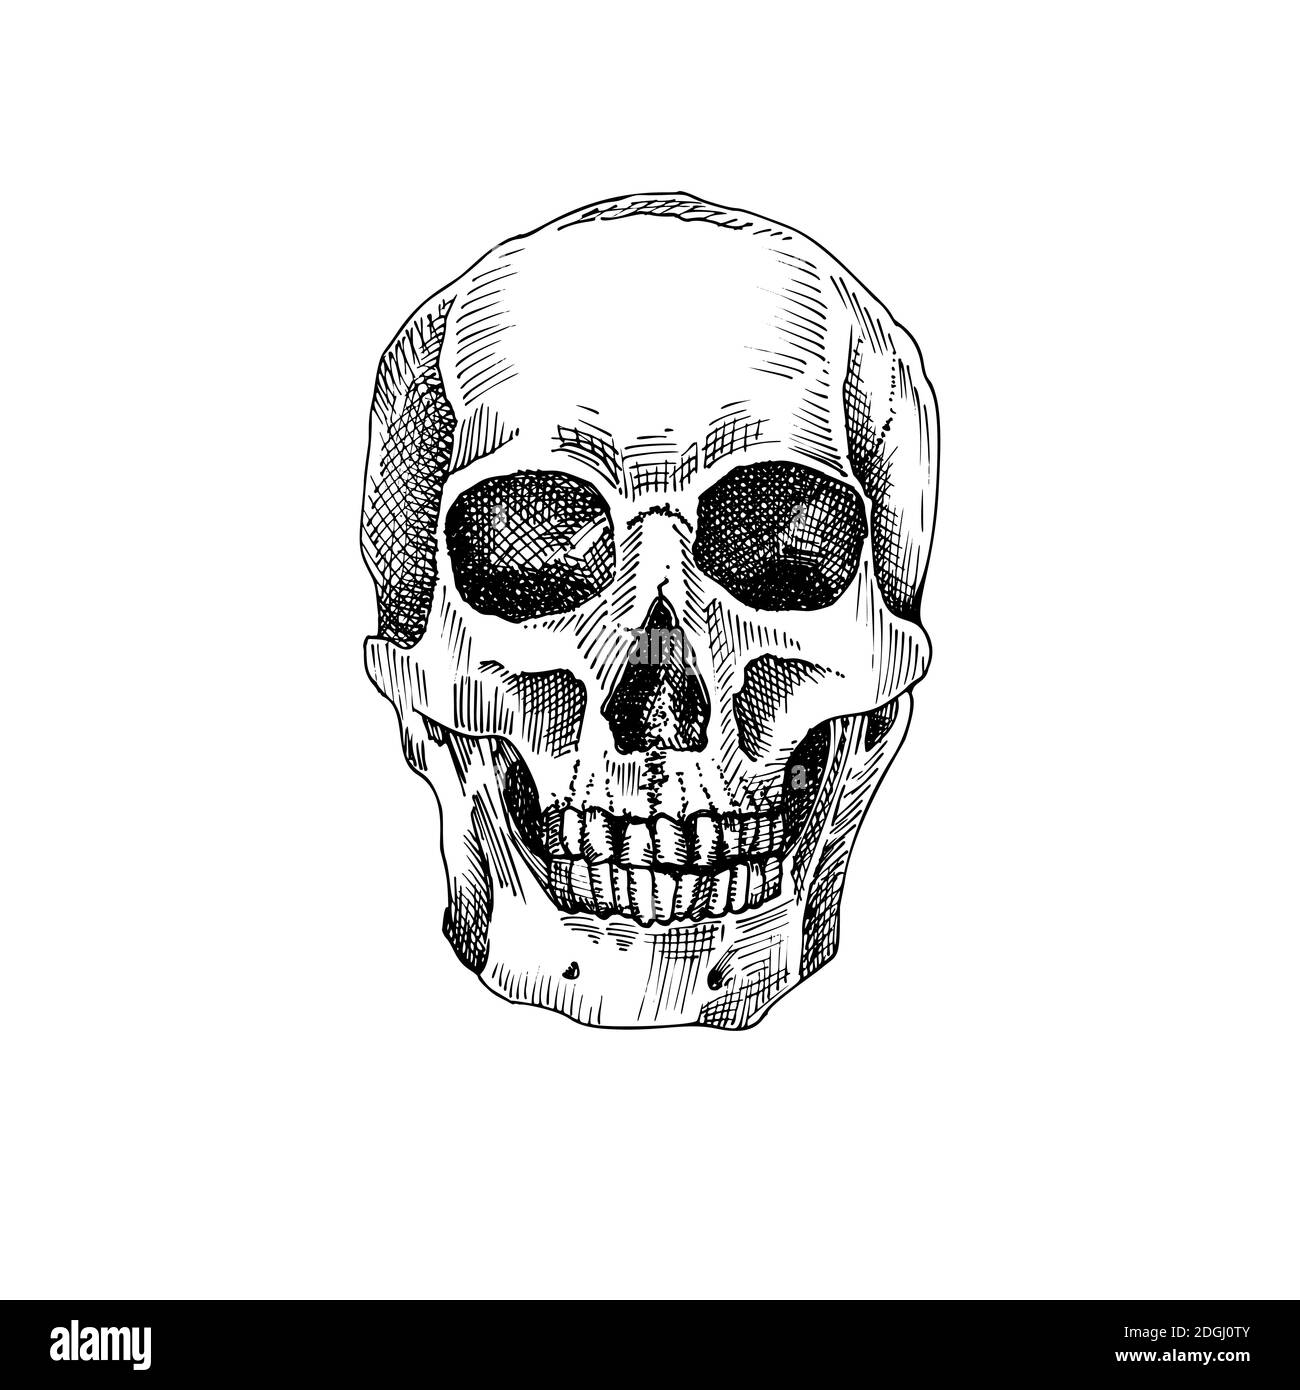 Hand drawn sketch human skull. Black graphic art isolated on white background. Full face view of head. Engraving style. Vector Stock Vector